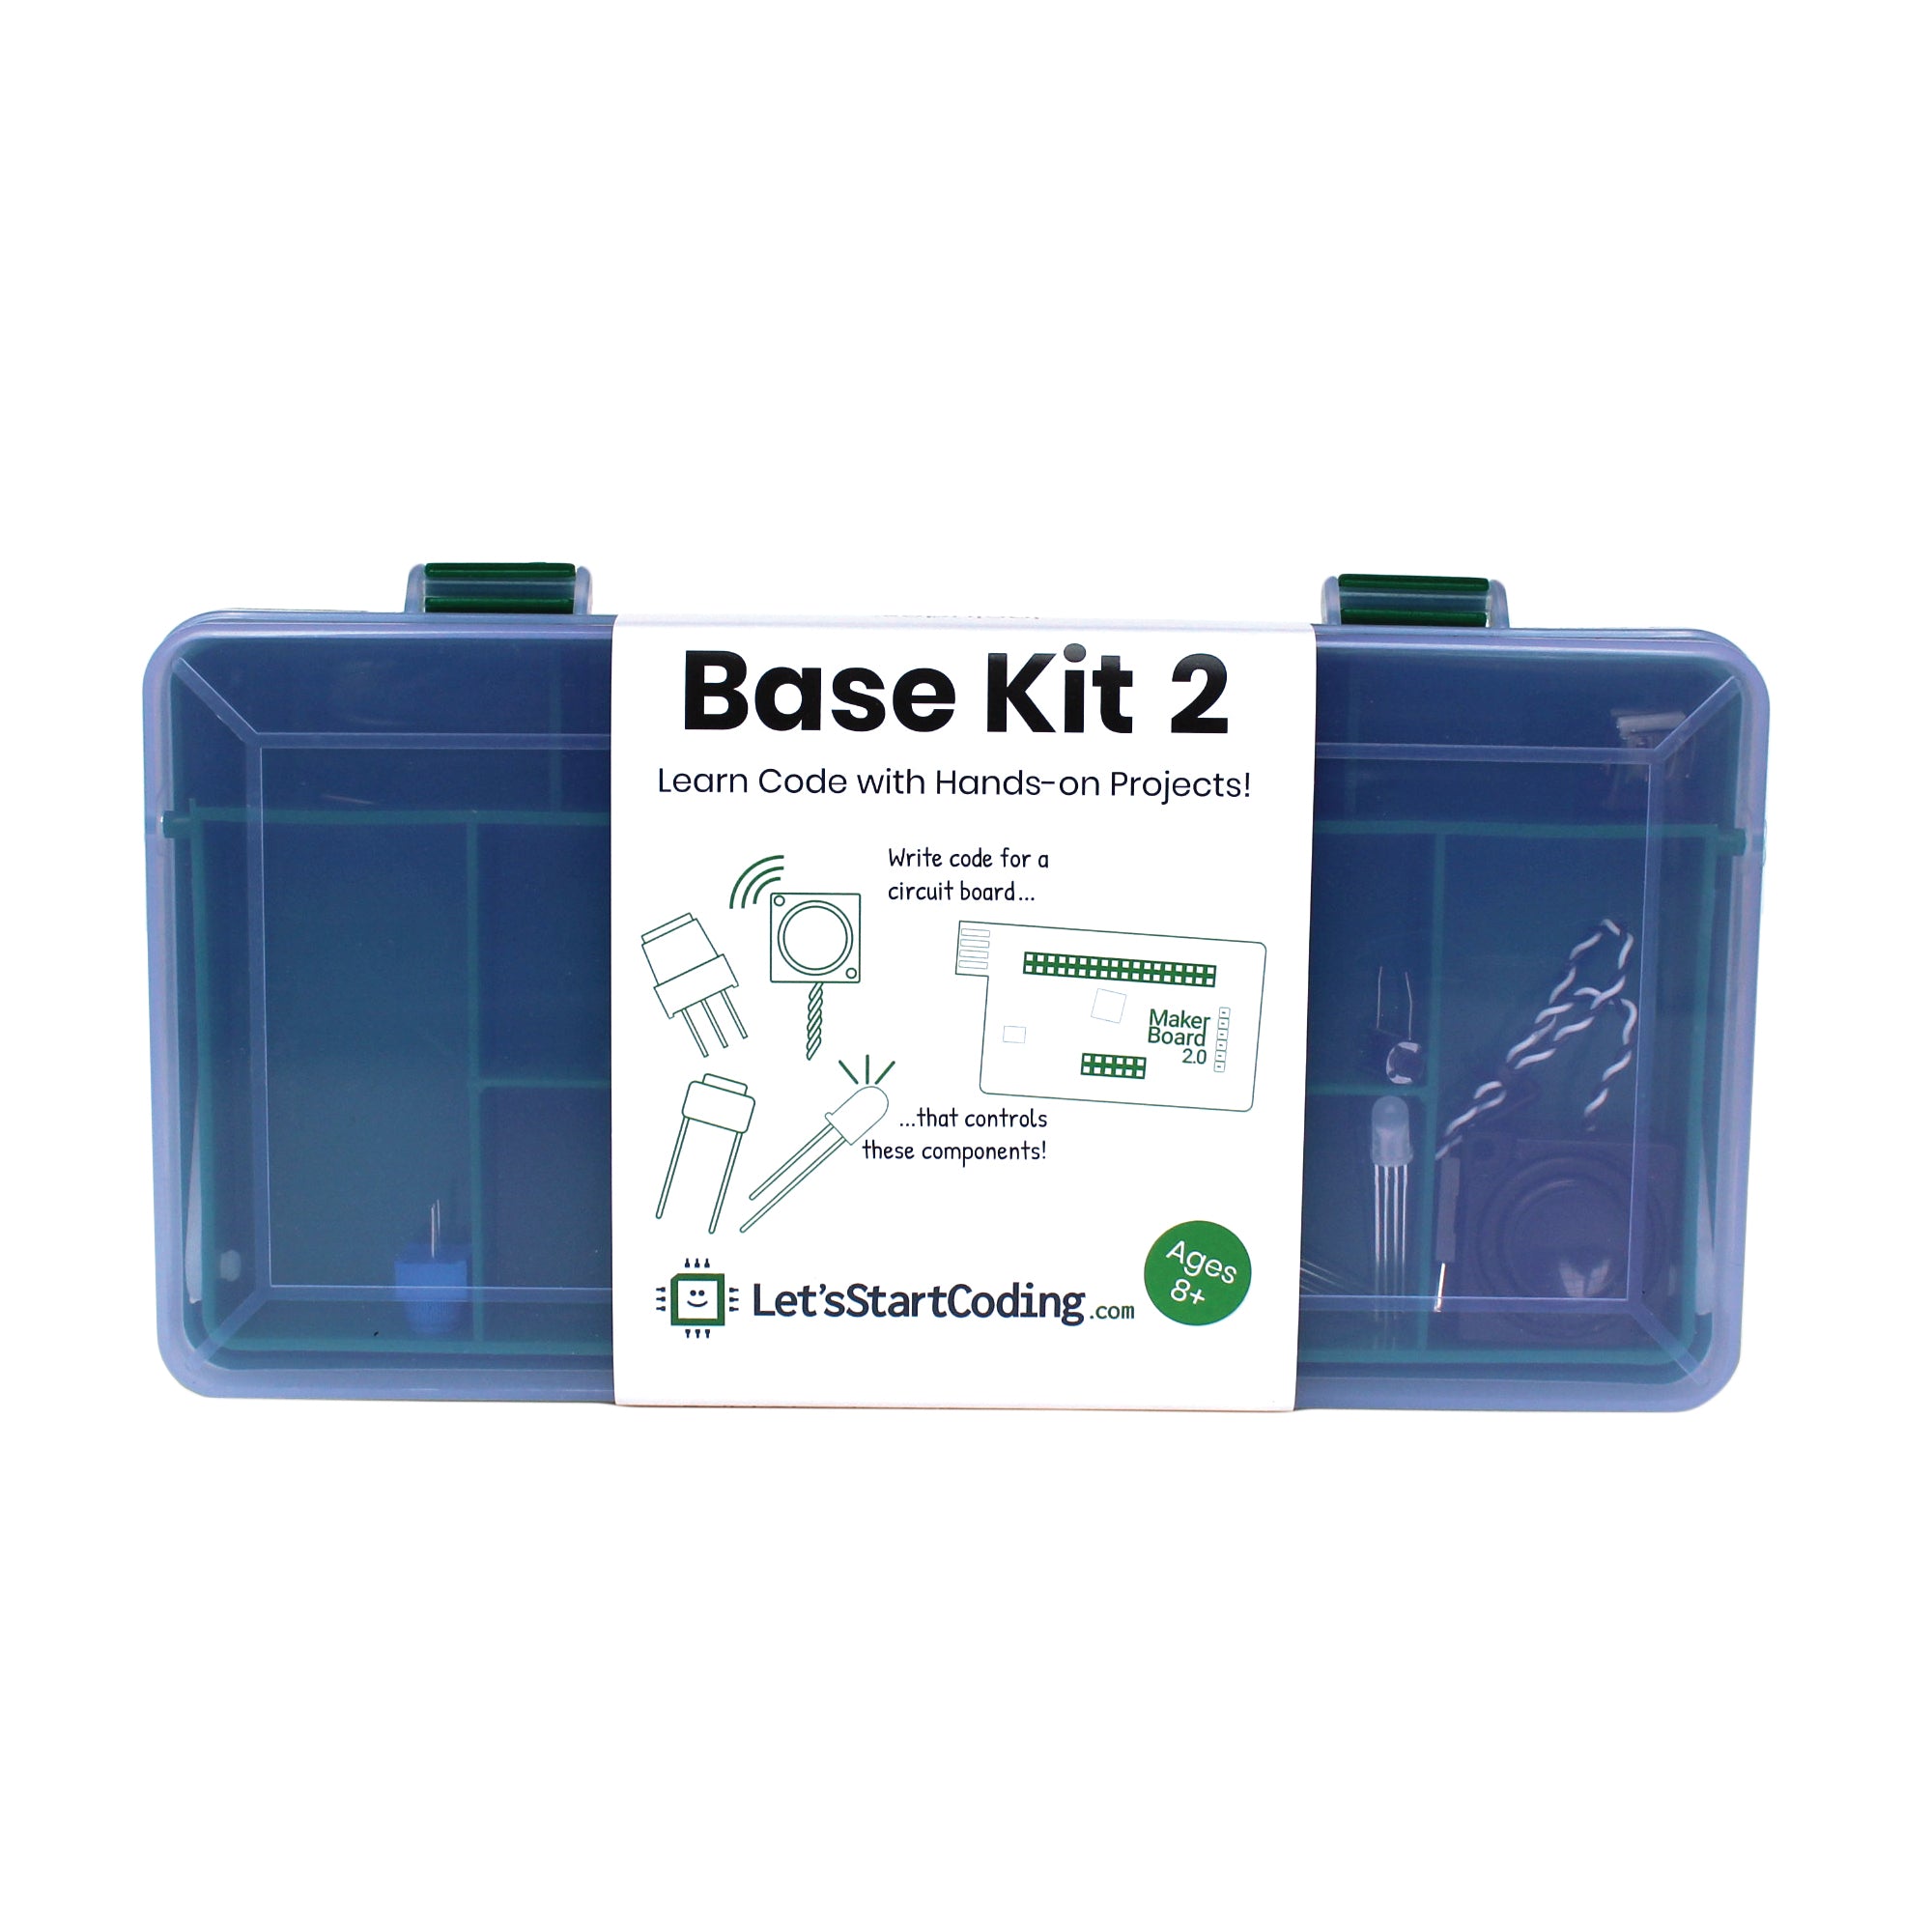 Let’s Start Coding Base Kit case closed with components inside. The hinged case is green with a clear lid. There is a label in the middle that reads “Base Kit 2. Learn Code with Hands-on Projects. Write code for a circuit board, that controls these components. Let’s start coding dot com. Ages 8 +.” You can see illustrations of the component outlines.